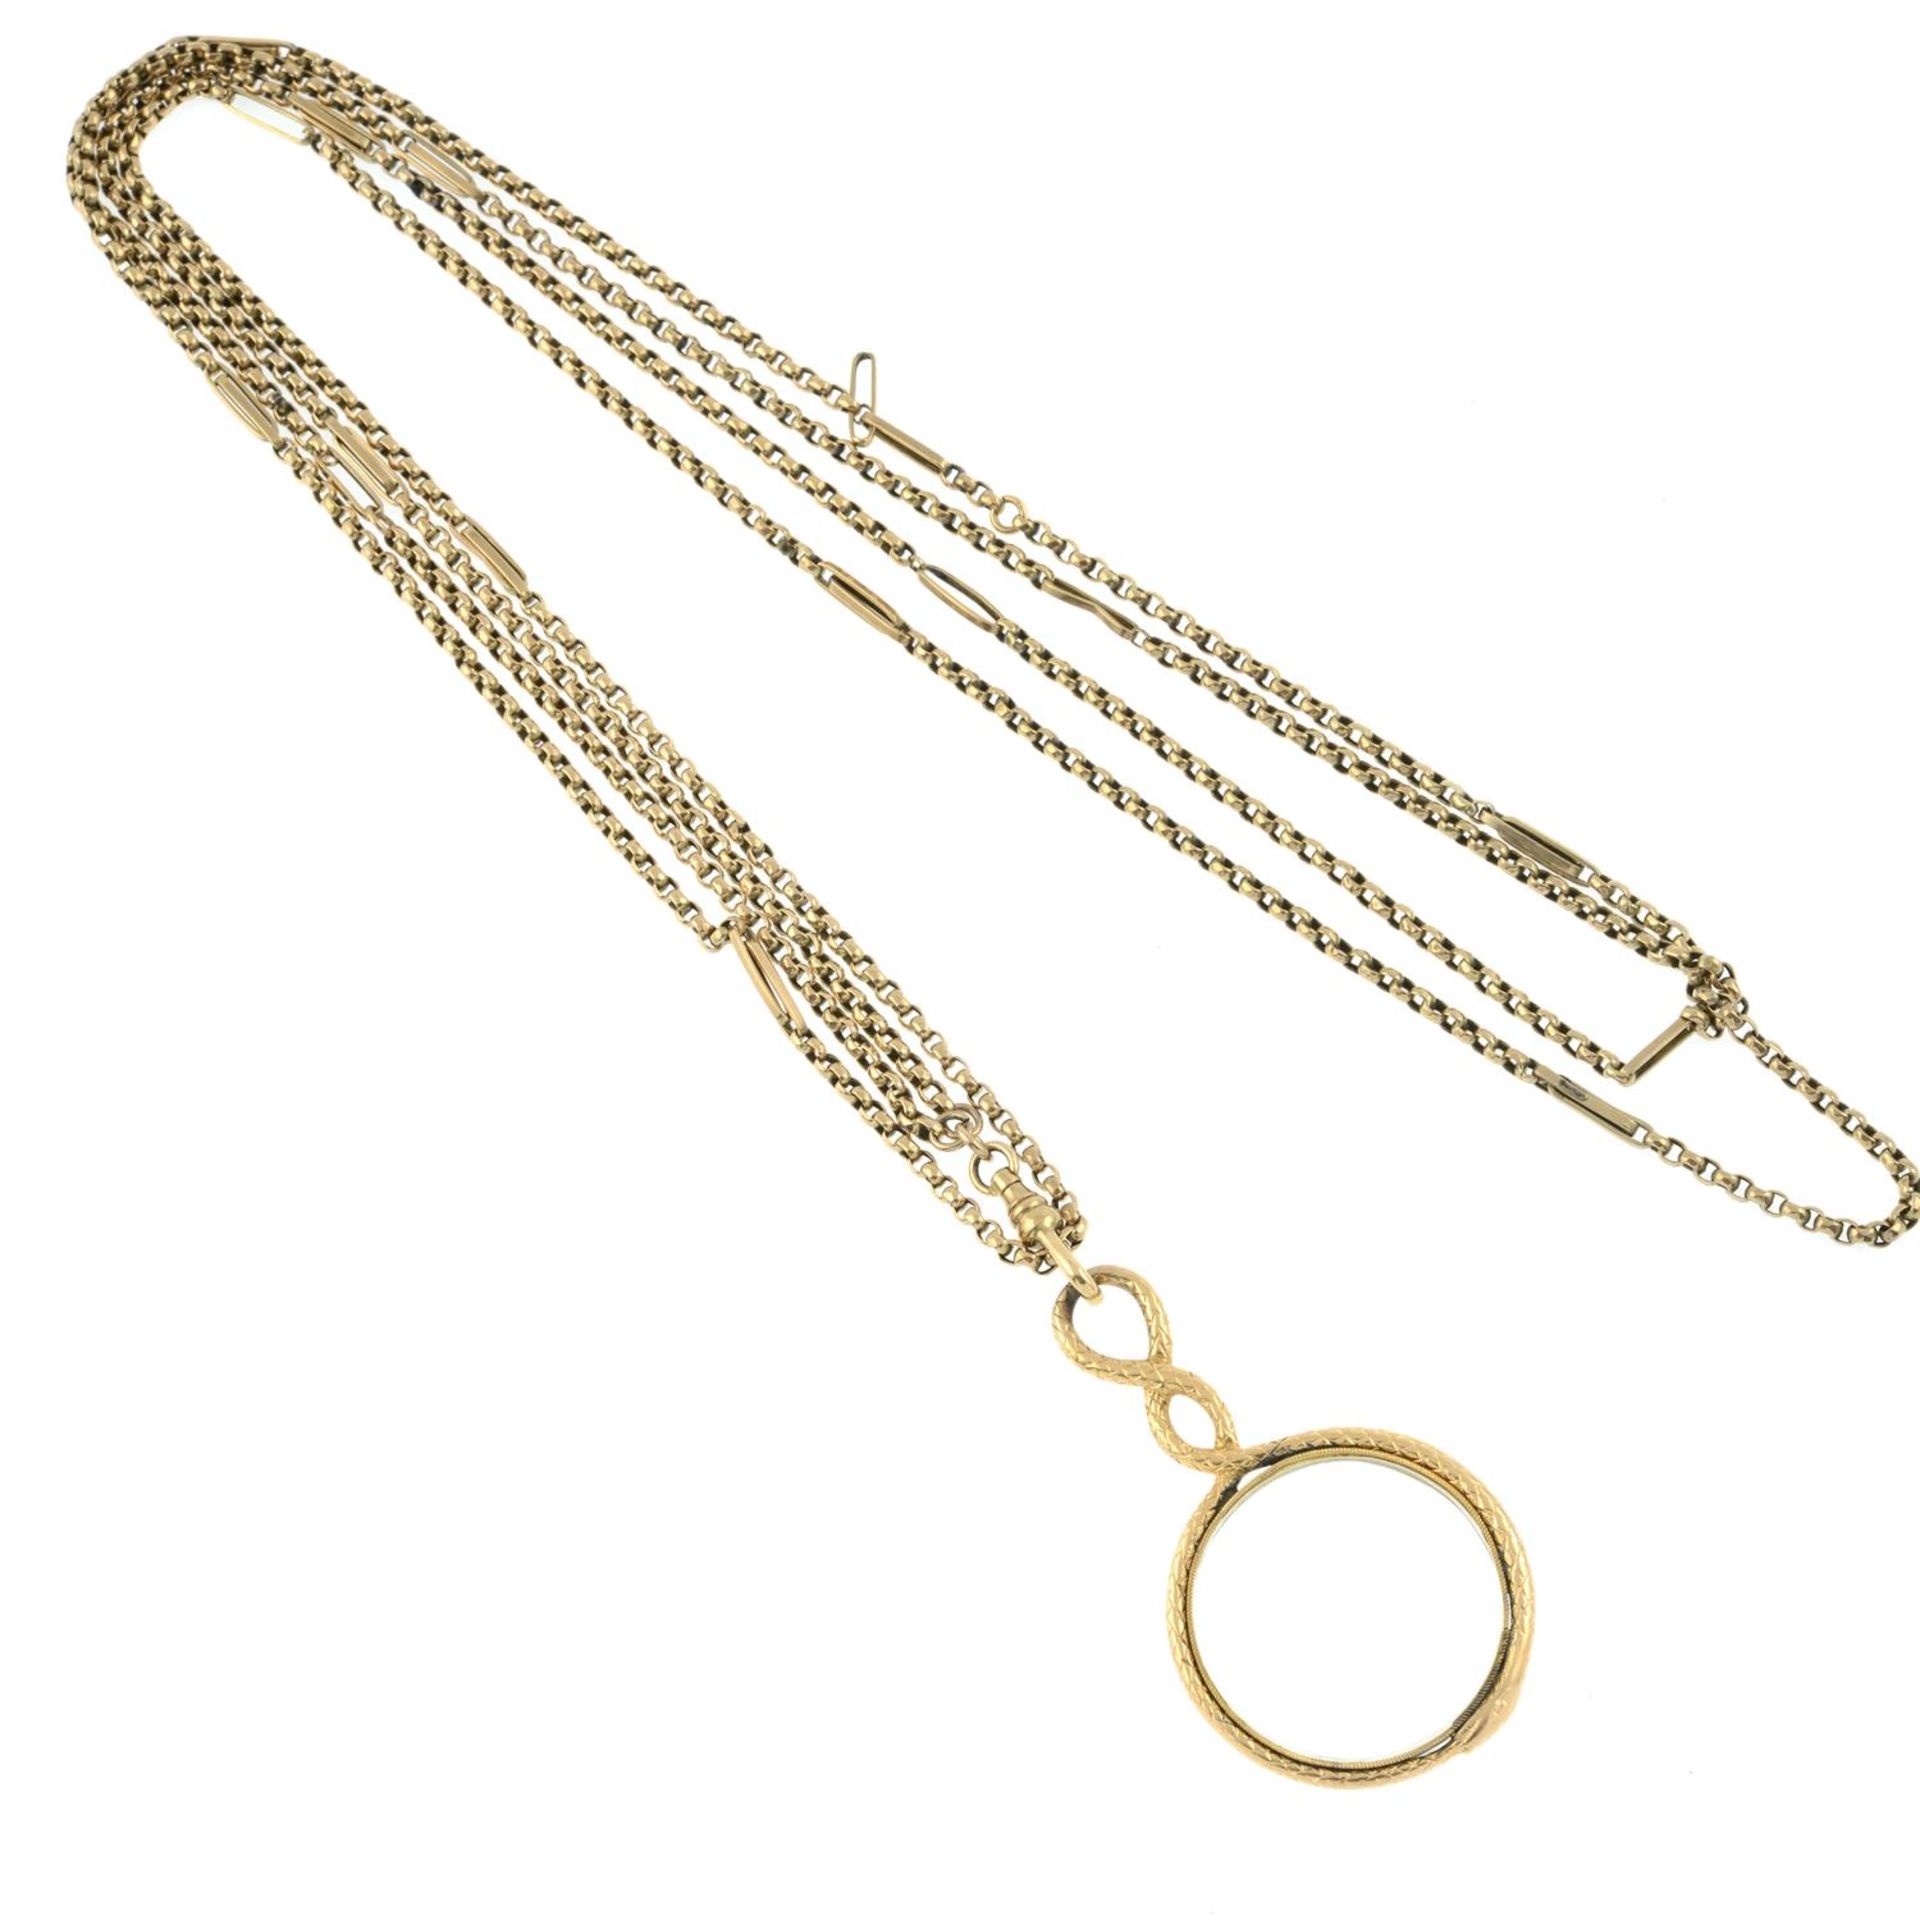 A late Georgian 15ct gold ouroboros snake magnifying glass, with late 19th century long guard chain. - Image 3 of 4